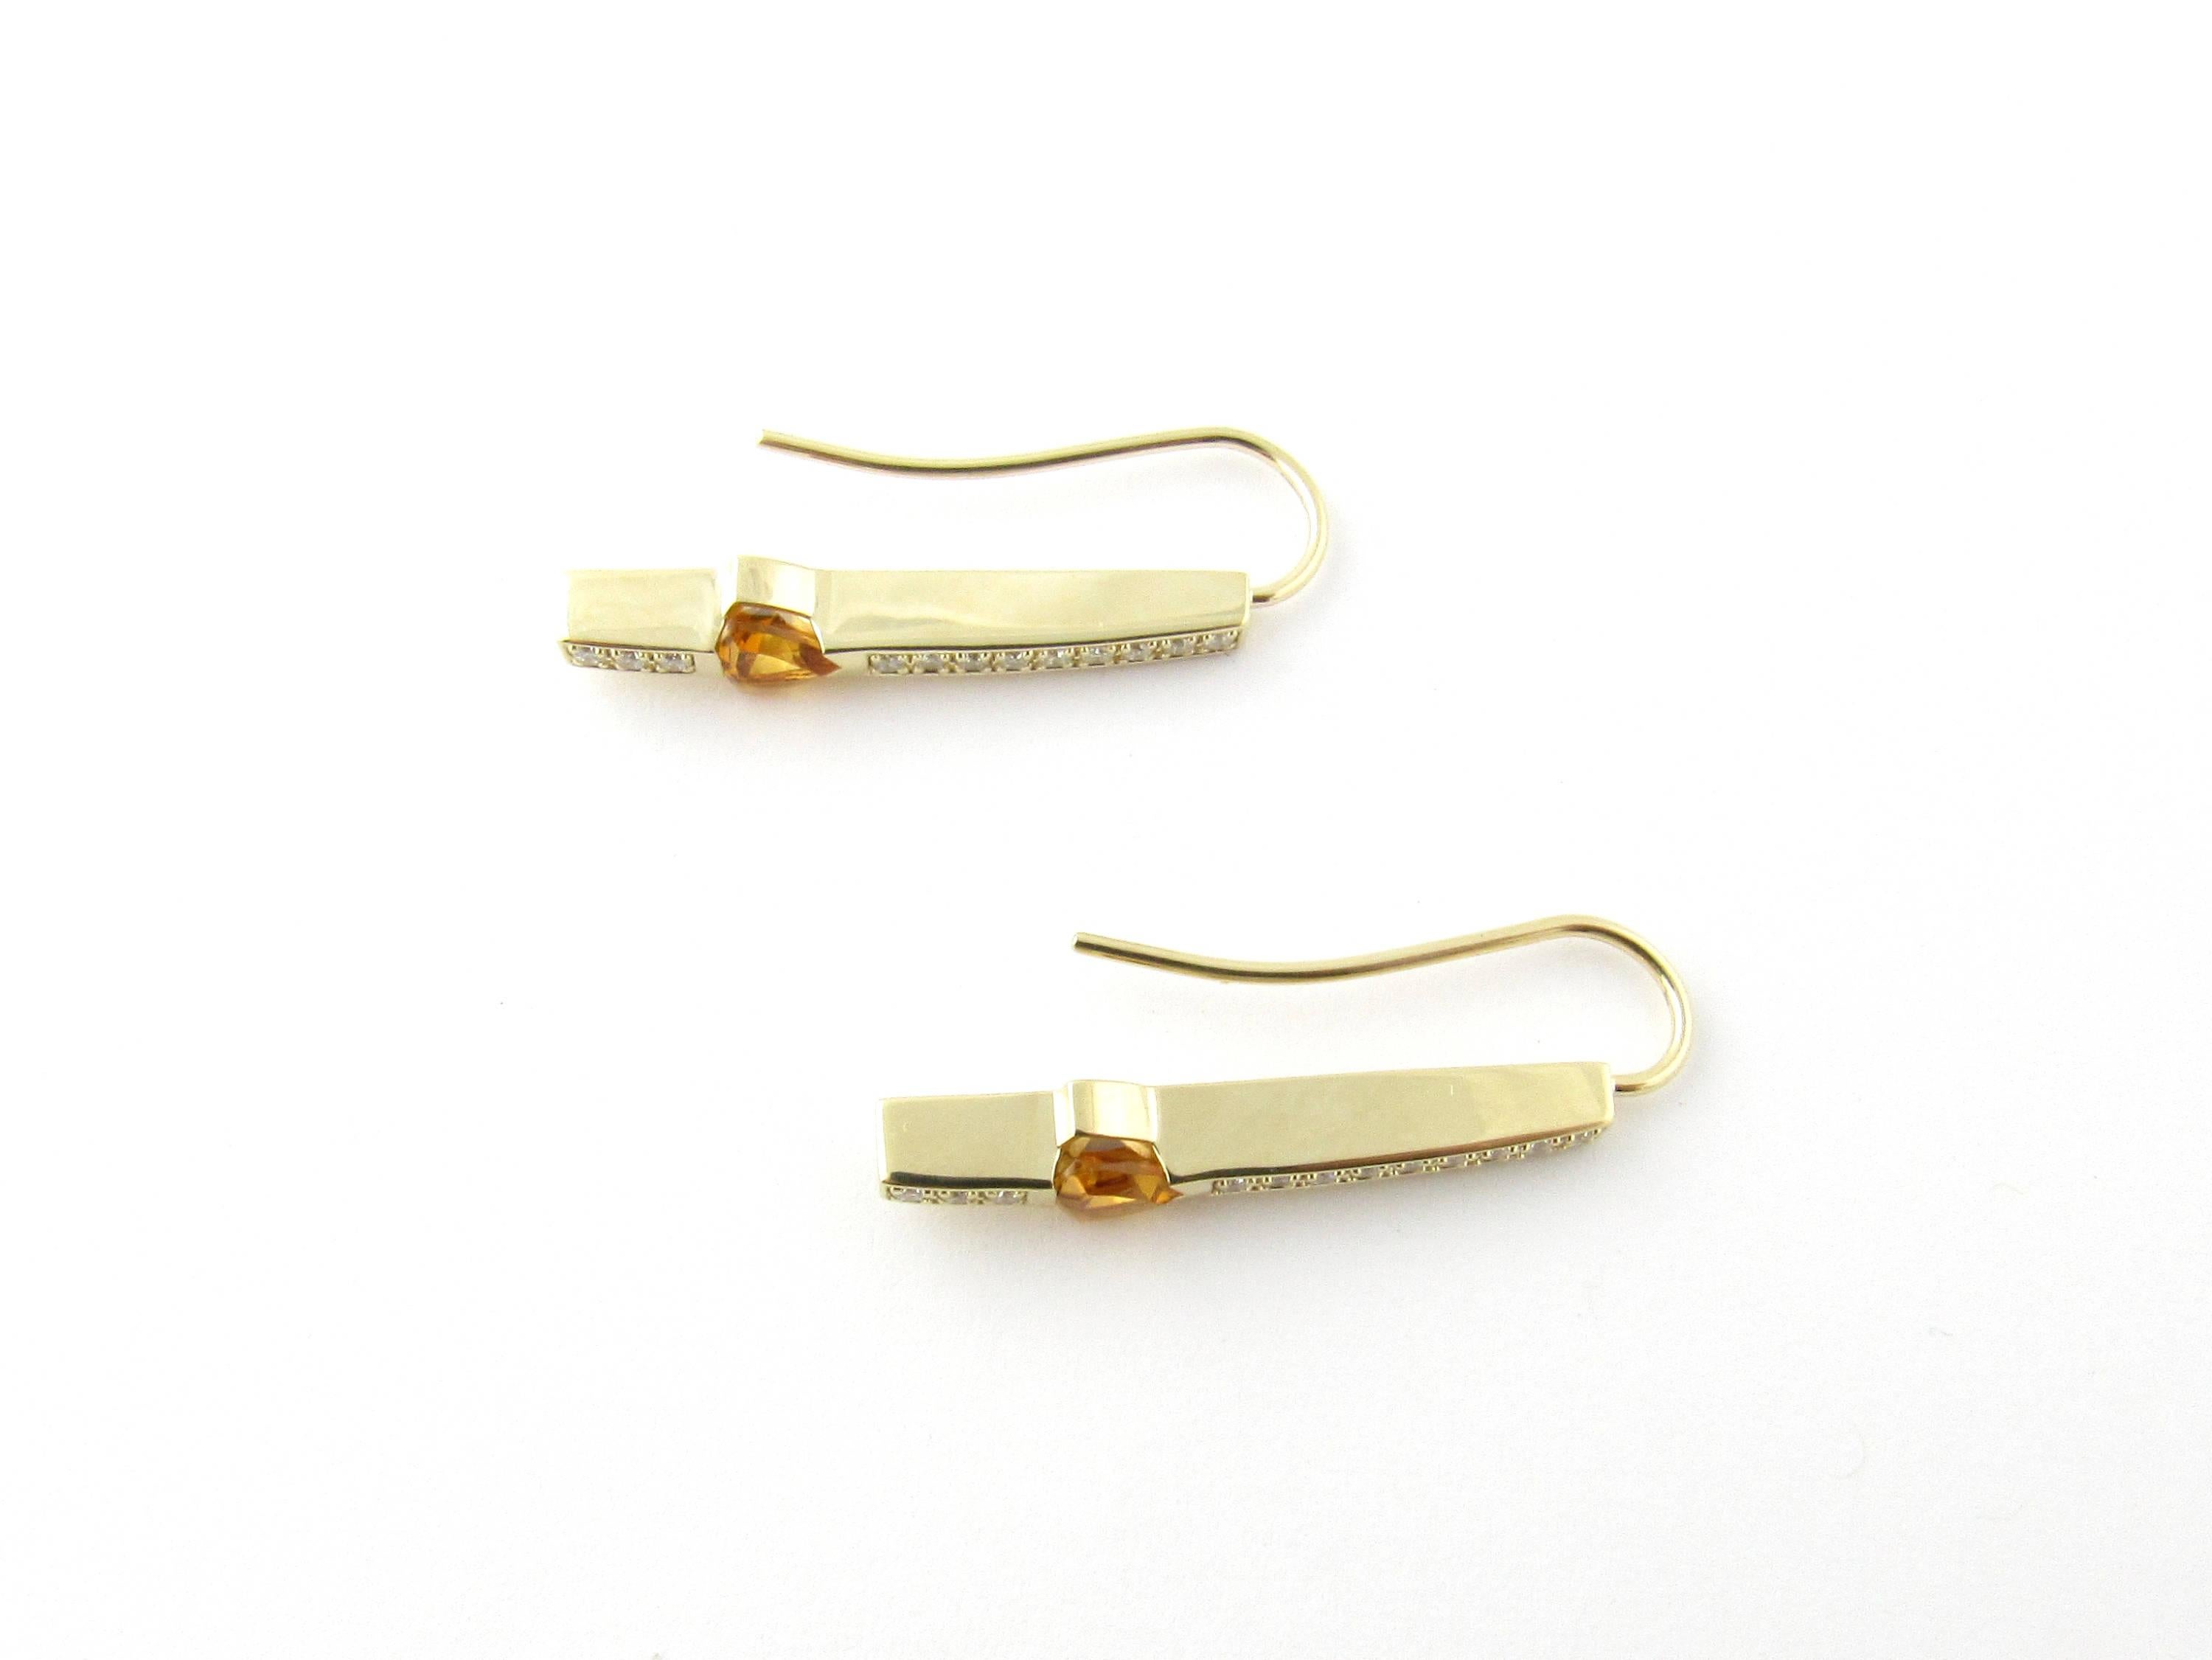 Vintage 14 Karat Yellow Gold Topaz and Diamond Earrings- 
These lovely earrings each feature 12 round brilliant cut diamonds accented with a trillion cut topaz (5 mm x 5 mm) set in 14K yellow gold. Fish hook closures. 
Approximate total diamond